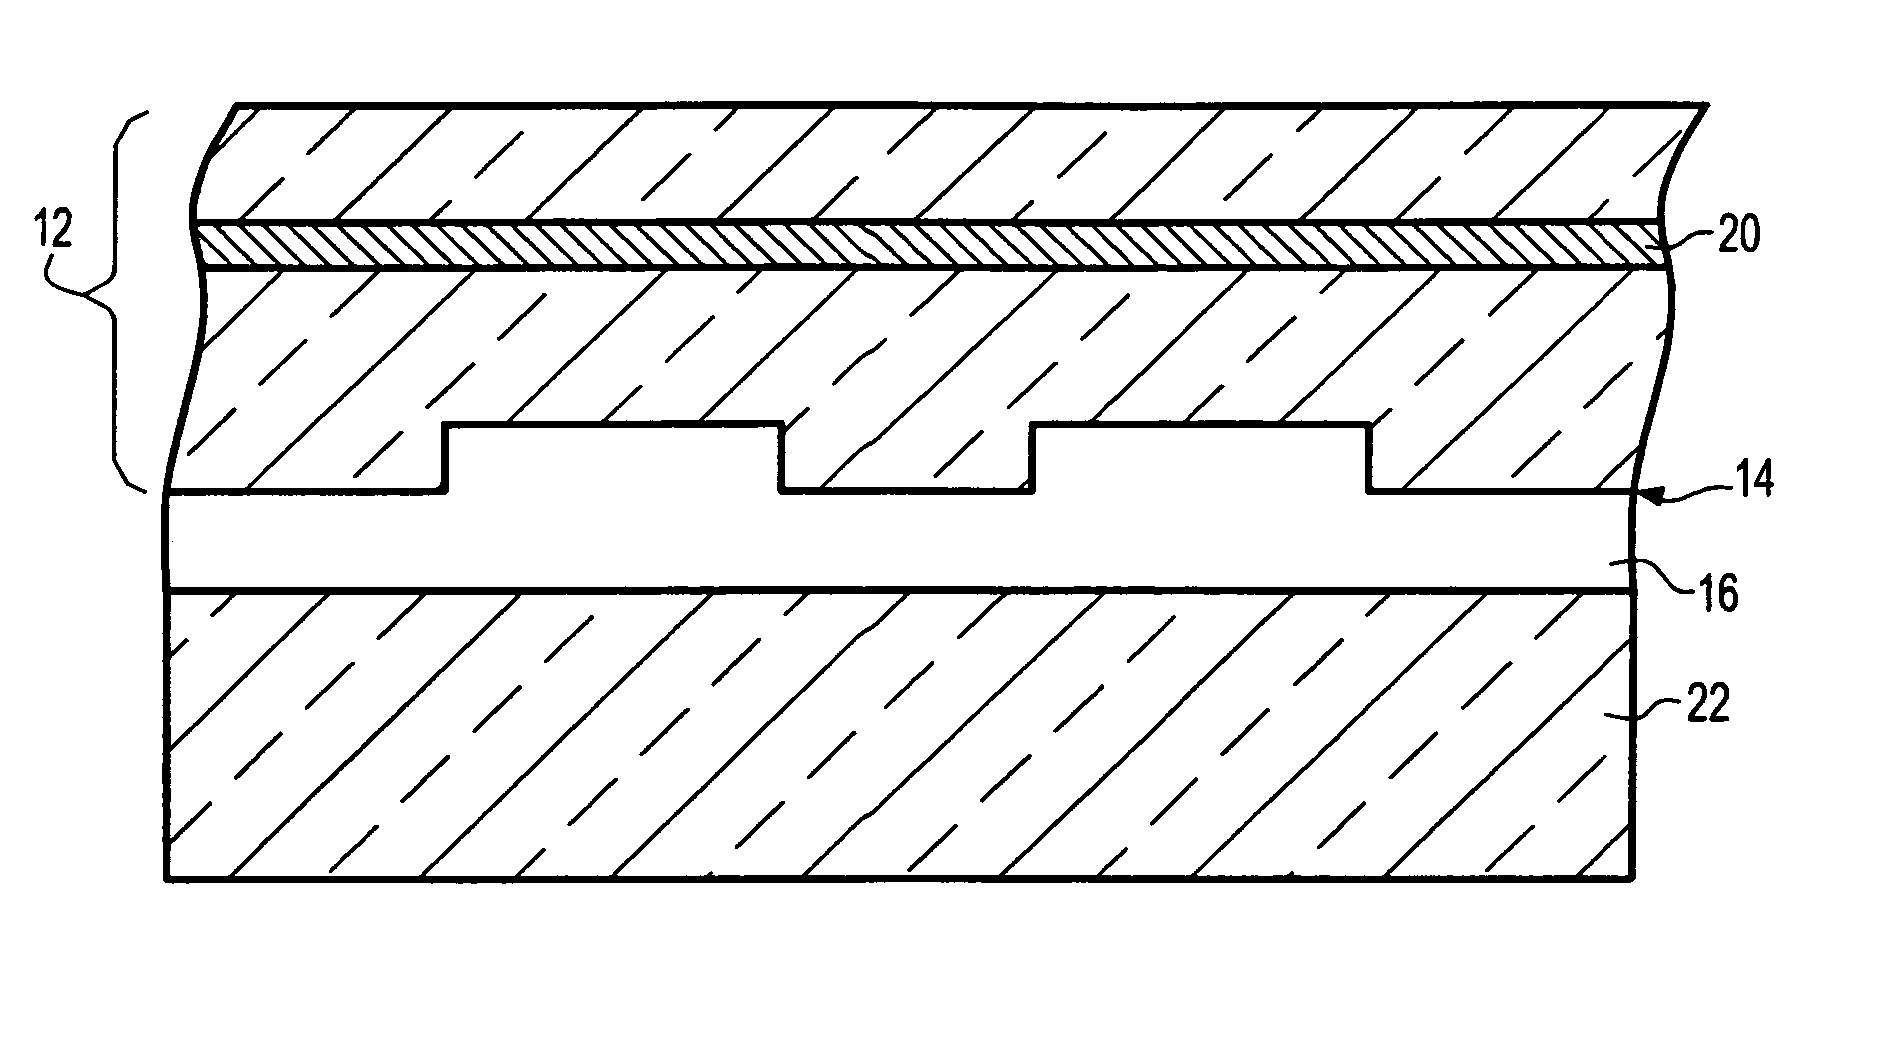 High performance field effect transistors on SOI substrate with stress-inducing material as buried insulator and methods